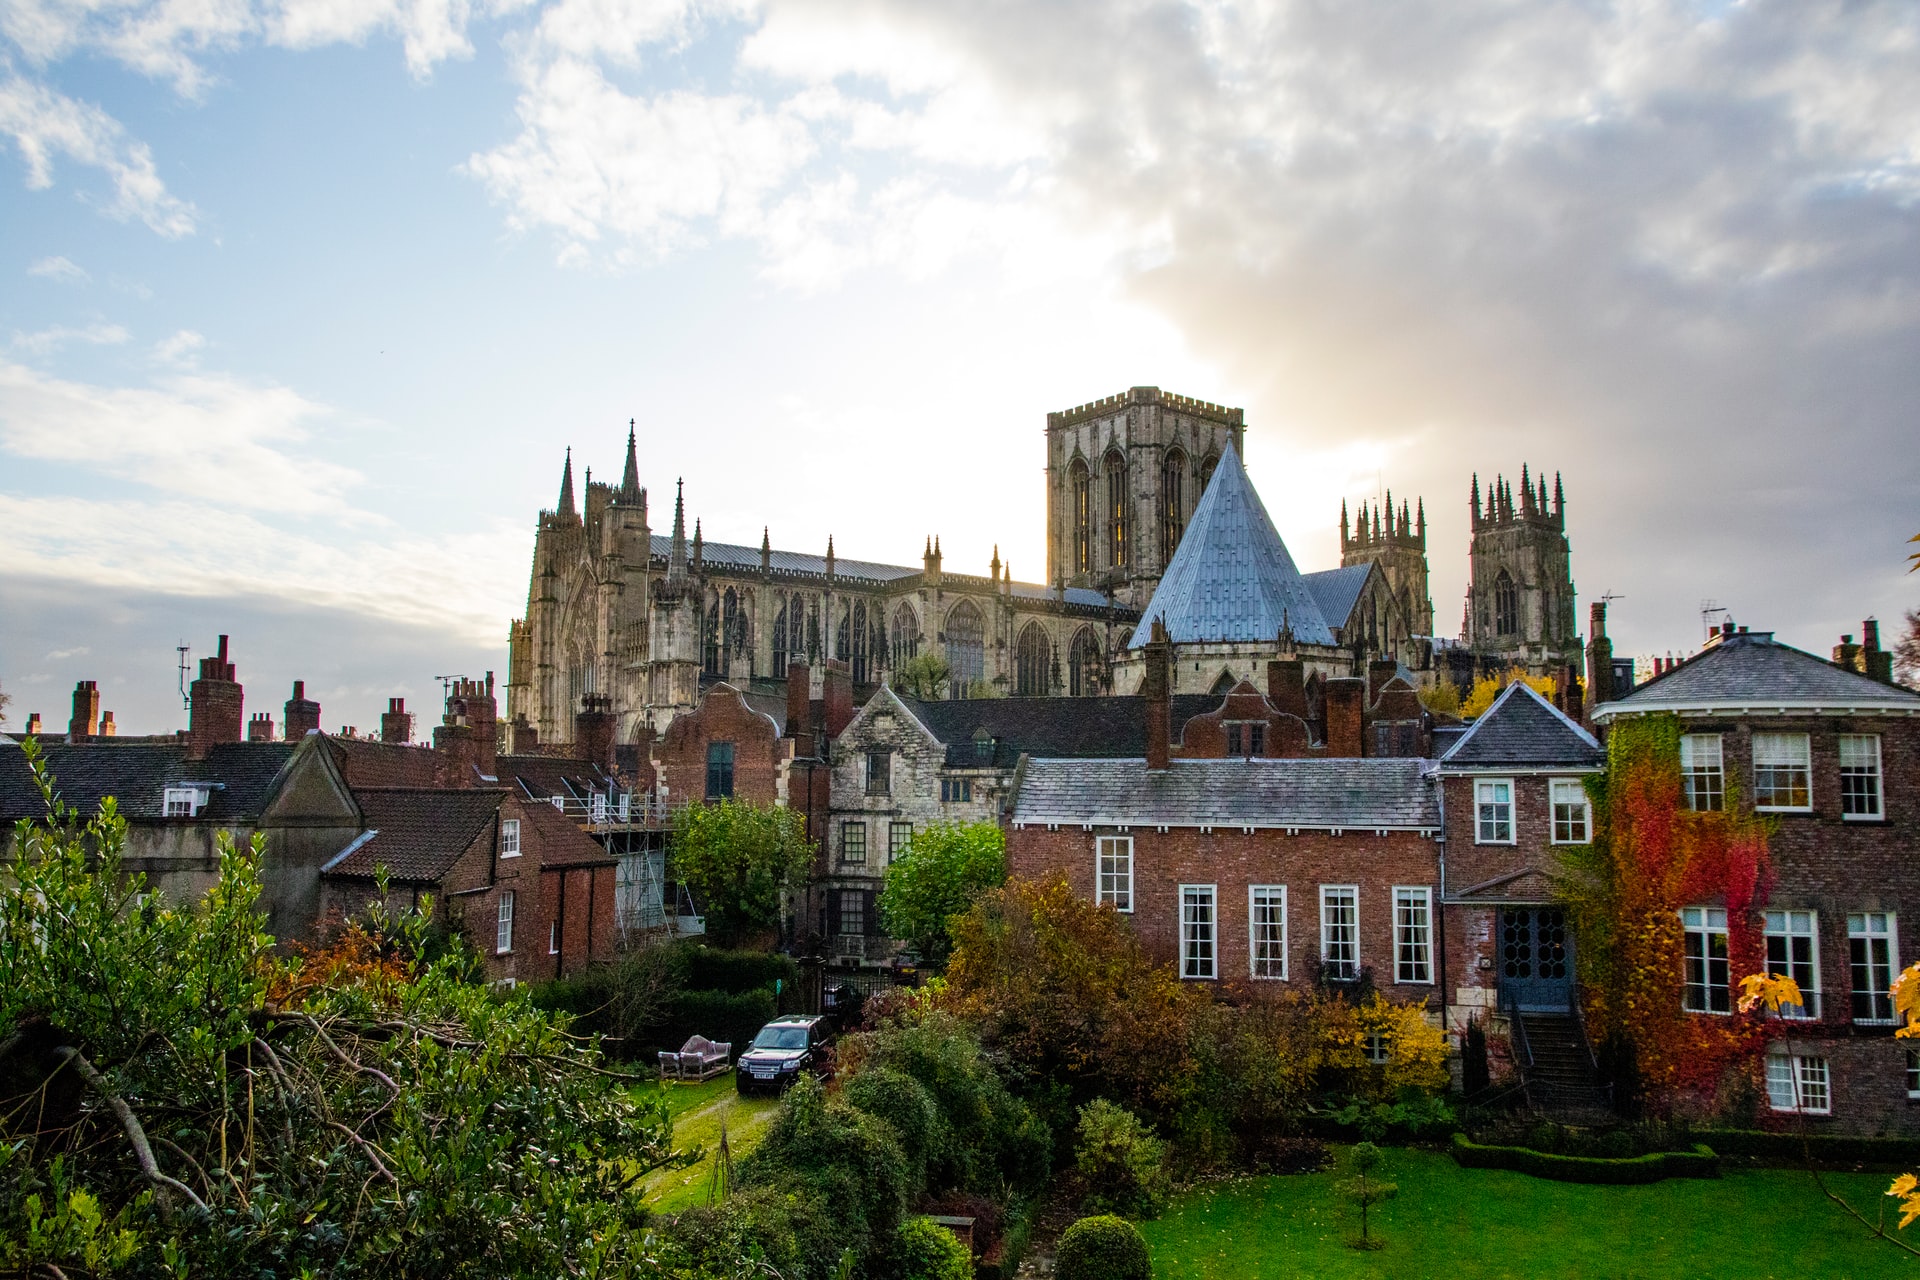 9 Things To Do In York That You Simply Can't Miss